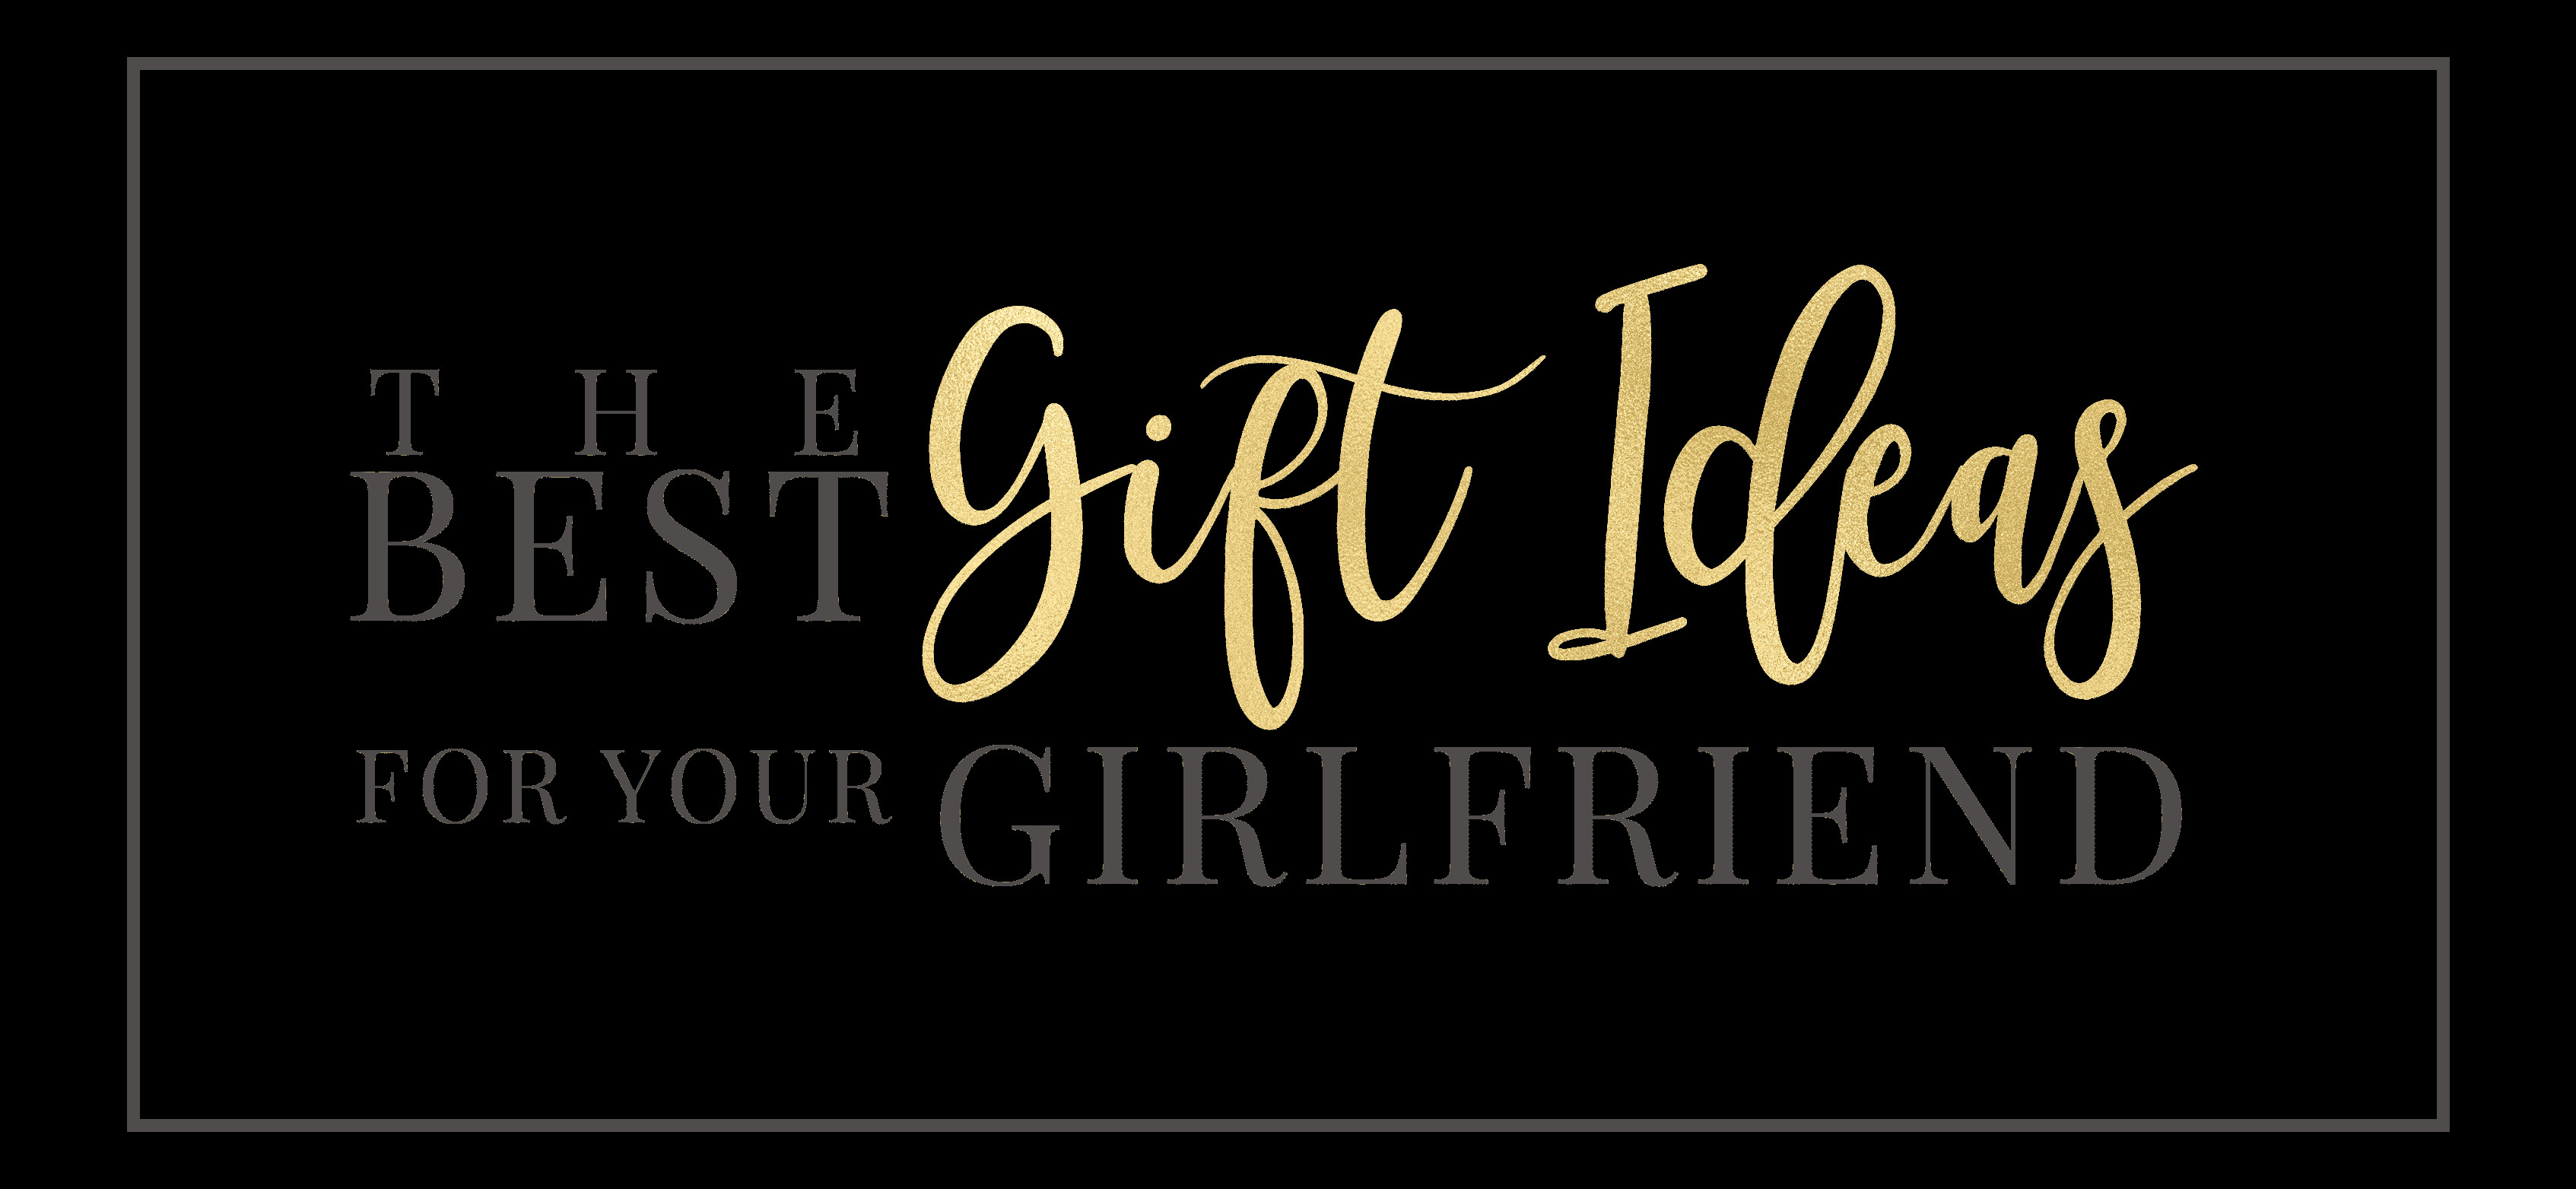 Great Gift Ideas For Your Girlfriend
 Home The Best Gift Ideas For Your Girlfriend